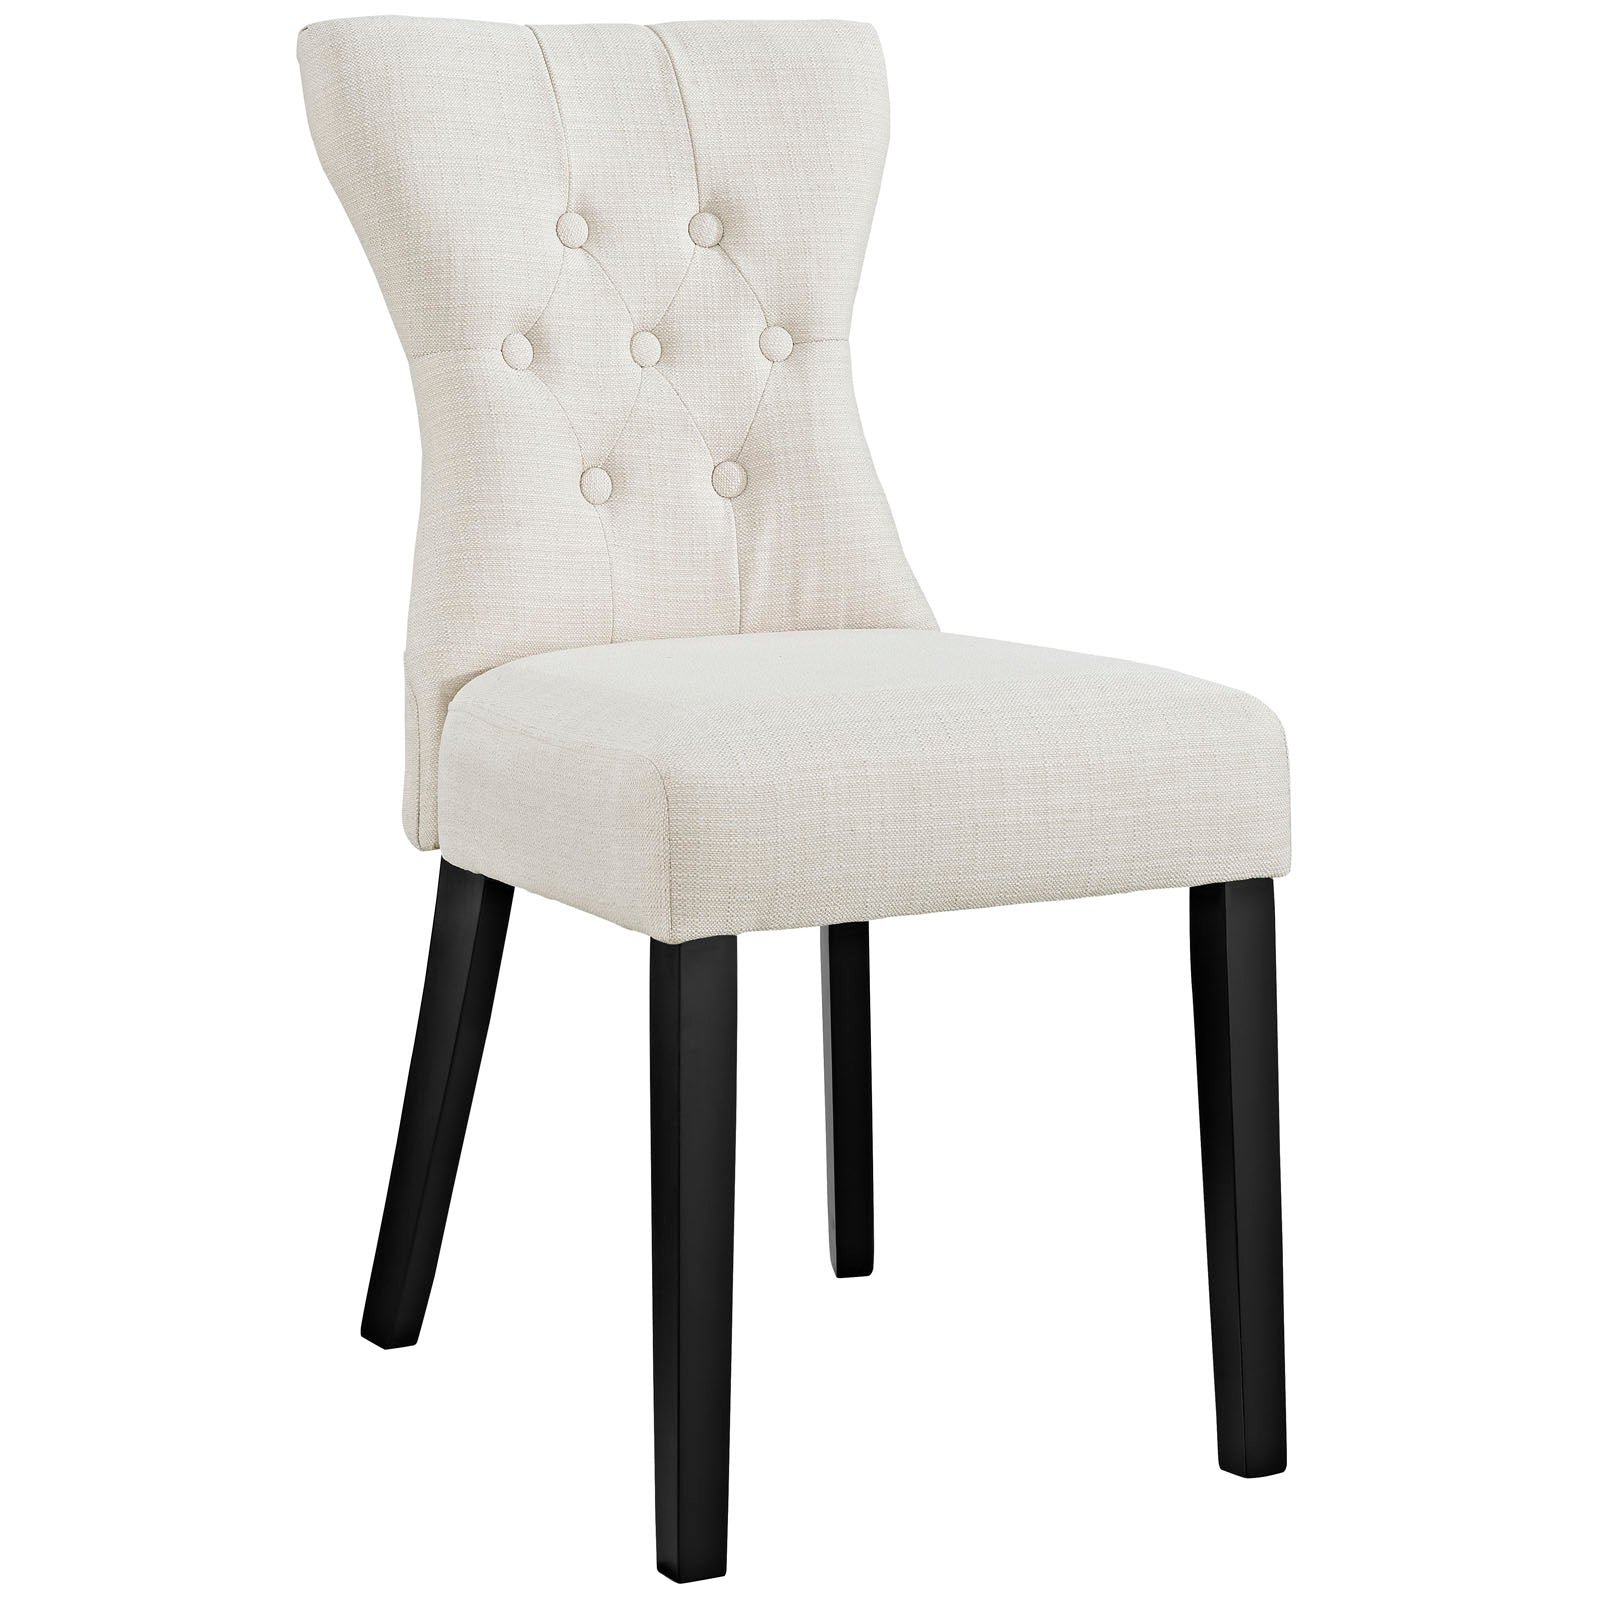 Silhouette Living Room Dining Fabric Side Chair - Softly Tapered Back Dining Chair